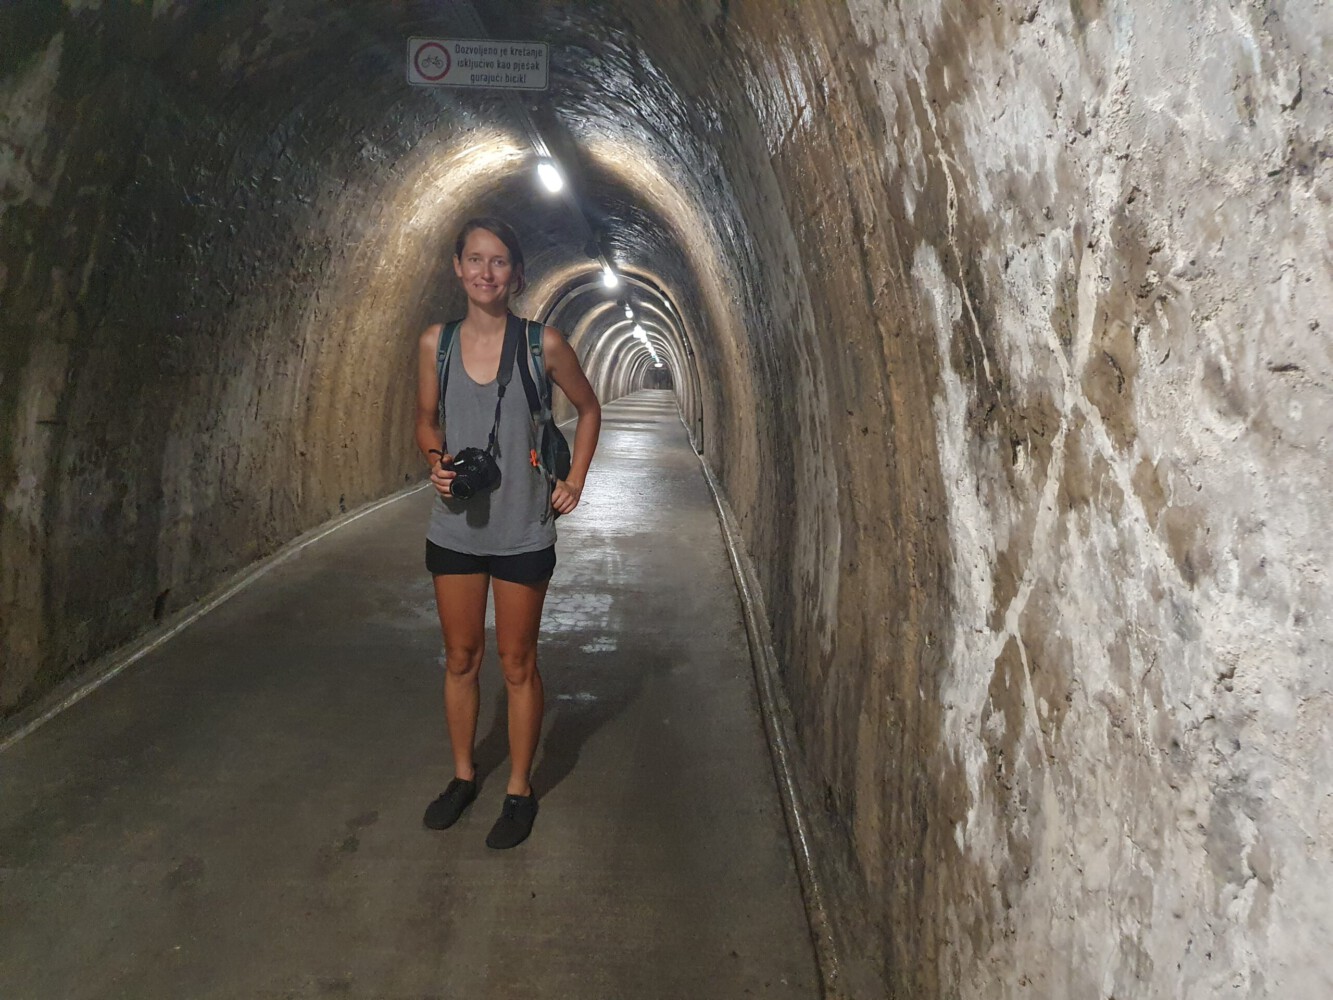 Alina at the Grič Tunnel. Finally some cold place.